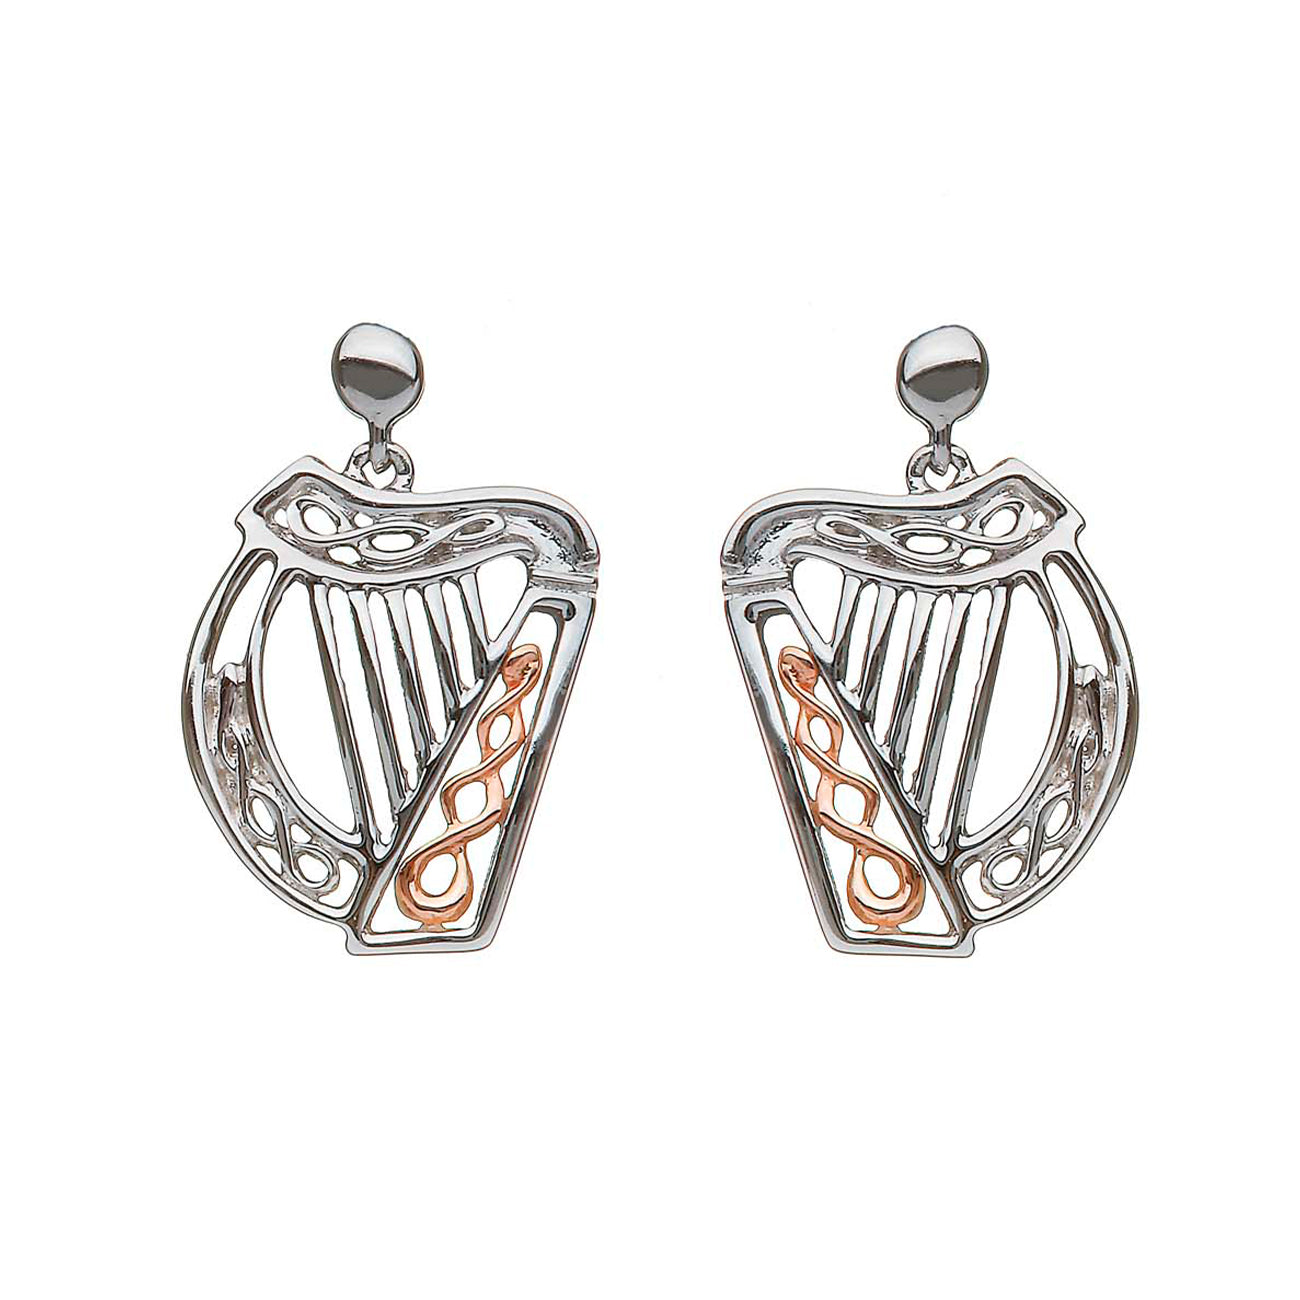 Sterling Silver and Rose Gold Irish Harp Earrings